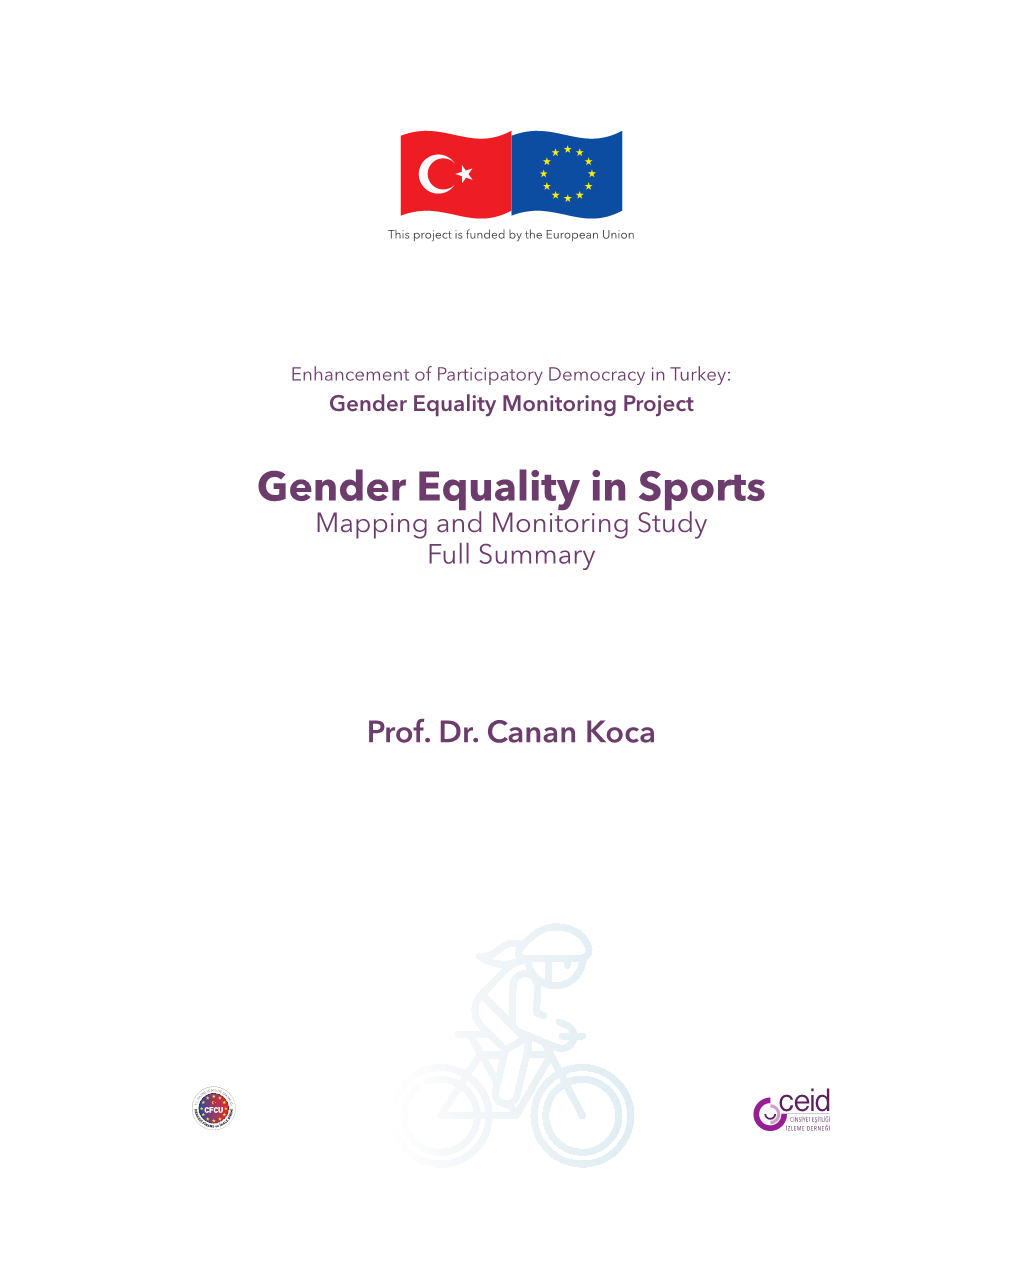 Gender Equality in Sports Mapping and Monitoring Study Full Summary